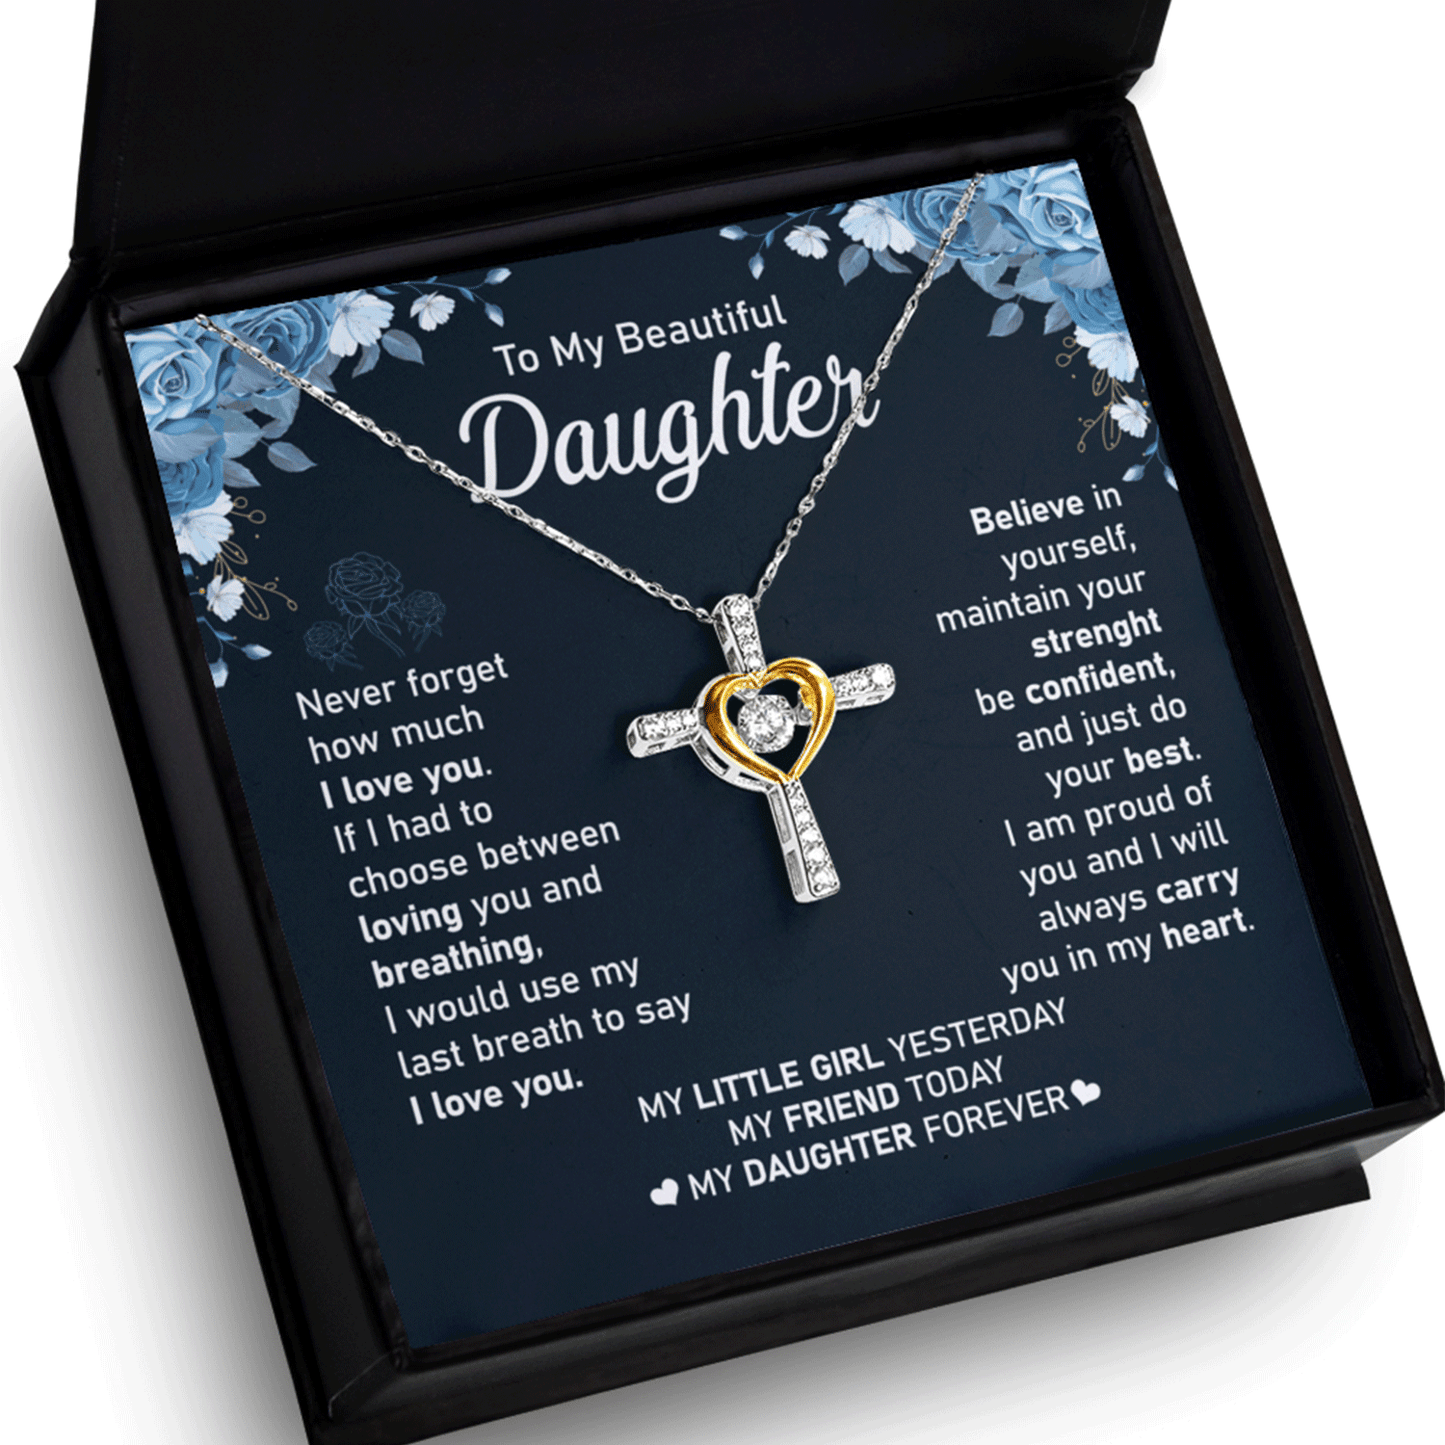 Gift For Daughter - Believe In Yourself - Cross Dancing Necklace With Message Card - Gift For Birthday, Christmas From Dad, Father, Mom, Mother